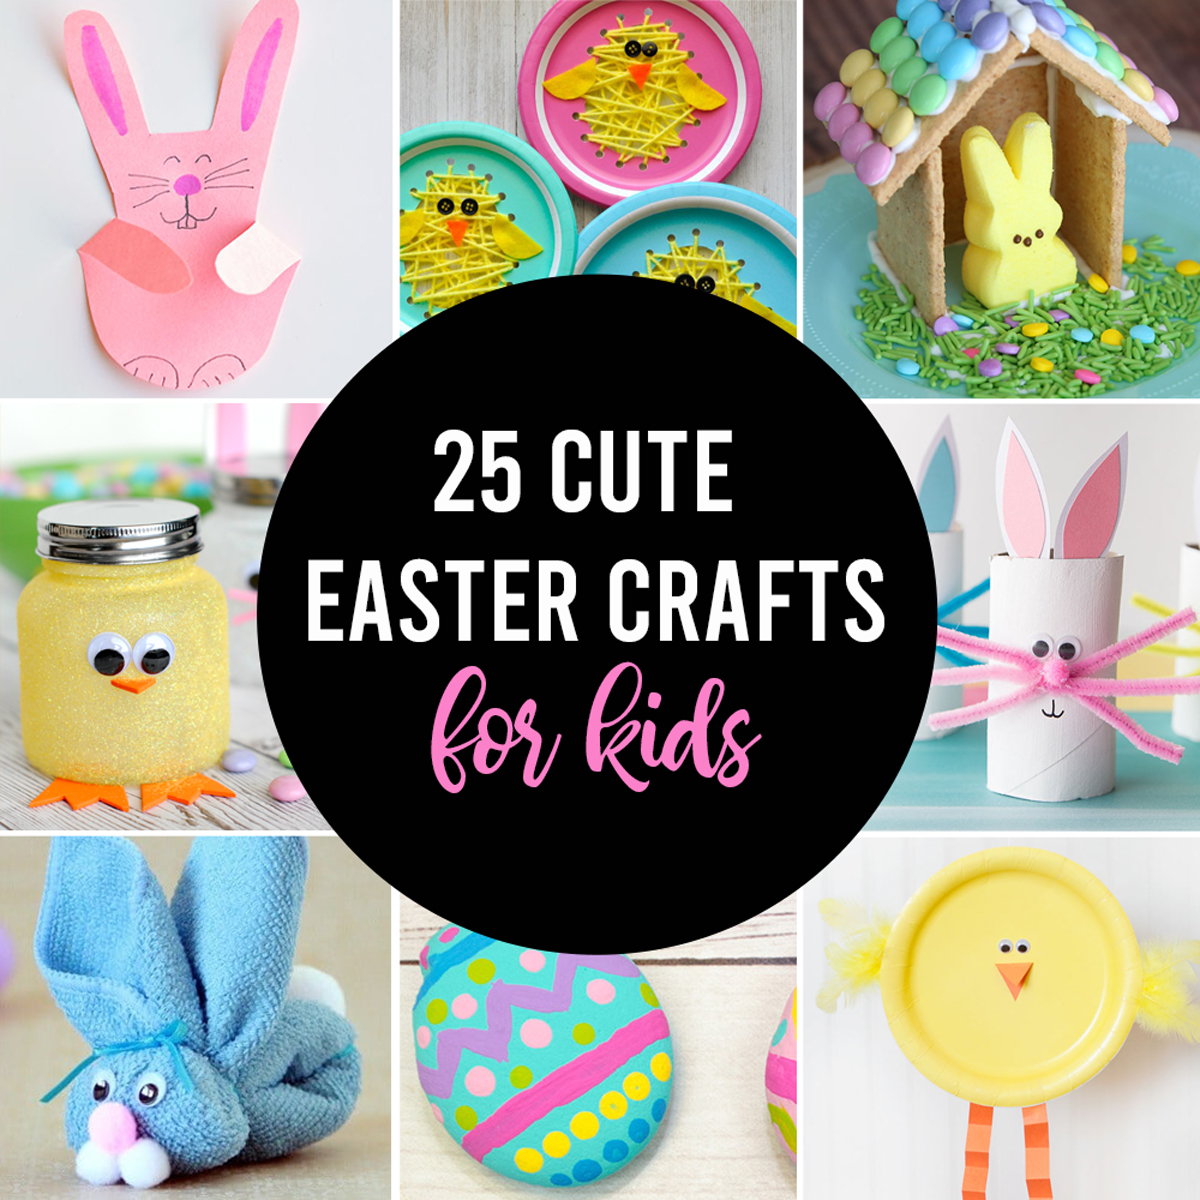 Craft For Toddlers: 21 Super Cute Ideas